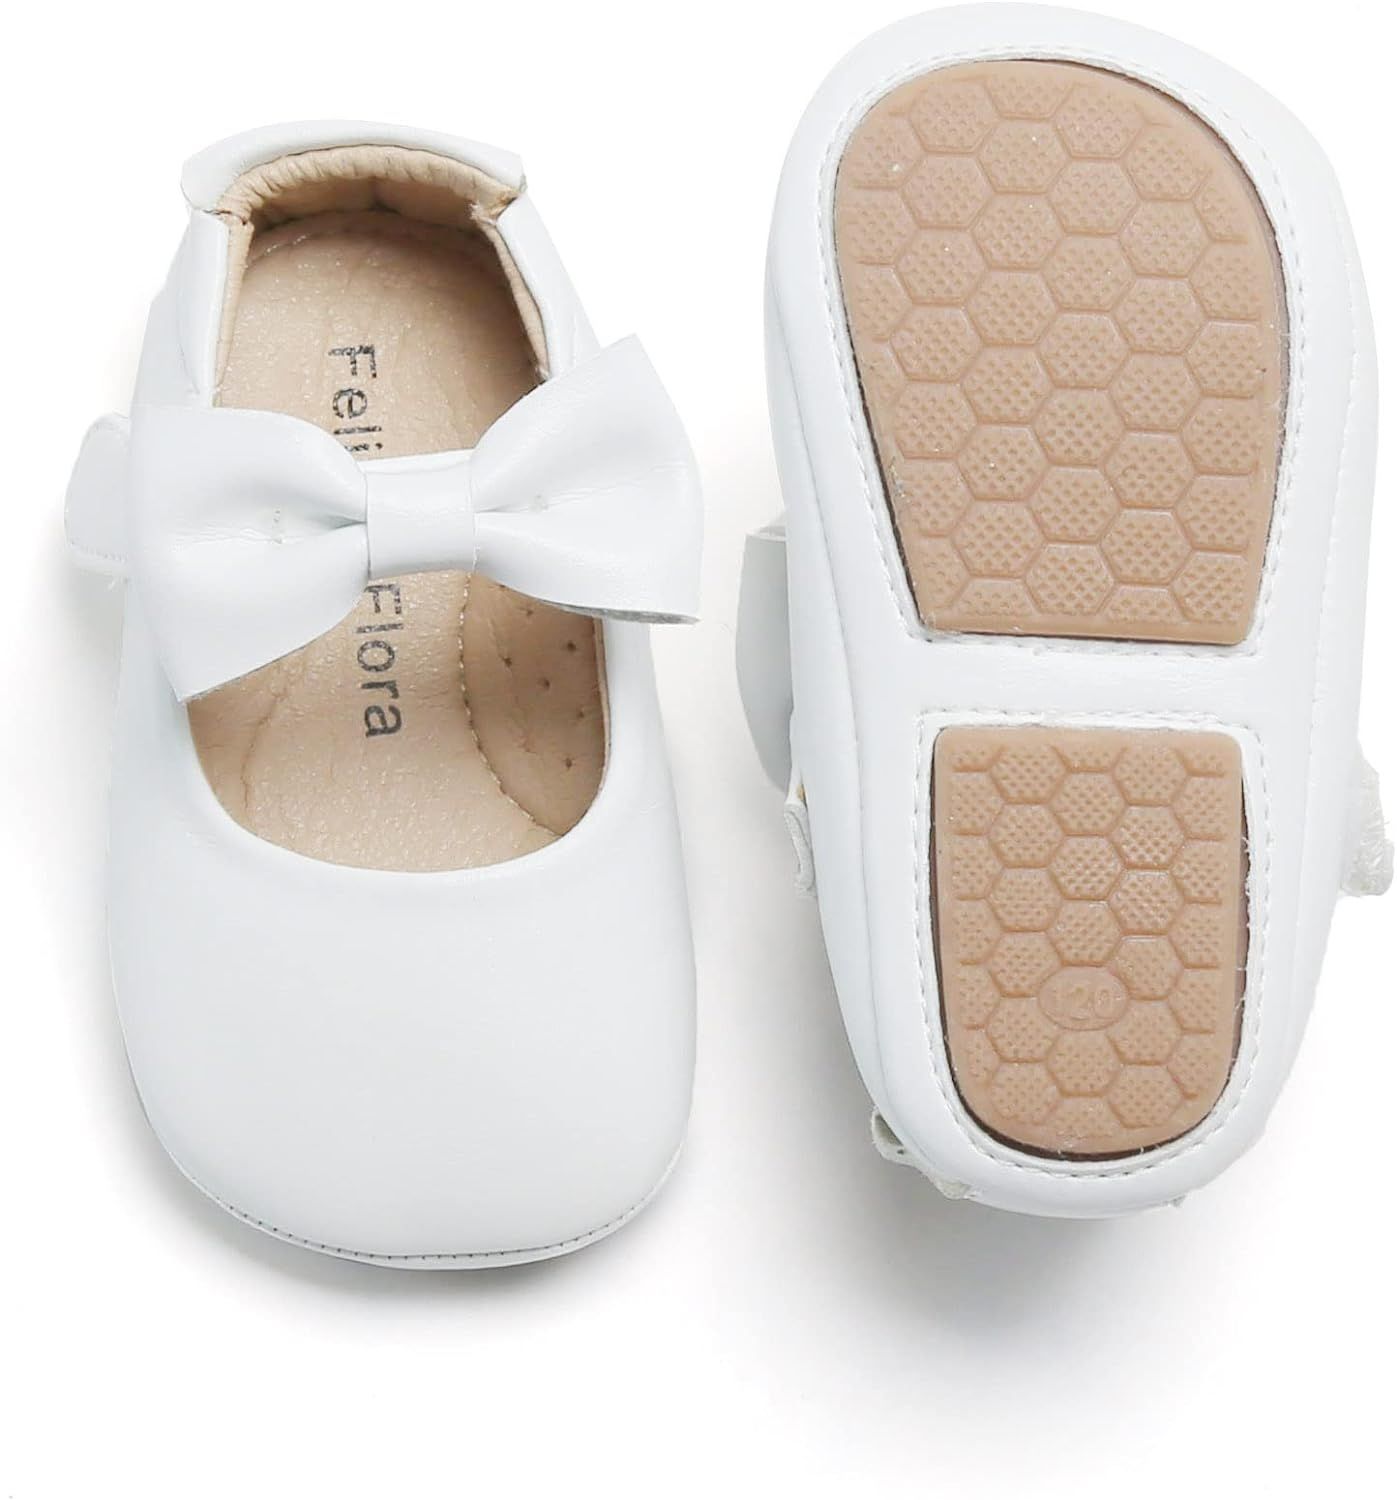 Soft Sole Baby Dress Shoes - Infant Baby Walking Shoes Moccasinss Rubber Sole Crib Shoes | Amazon (US)